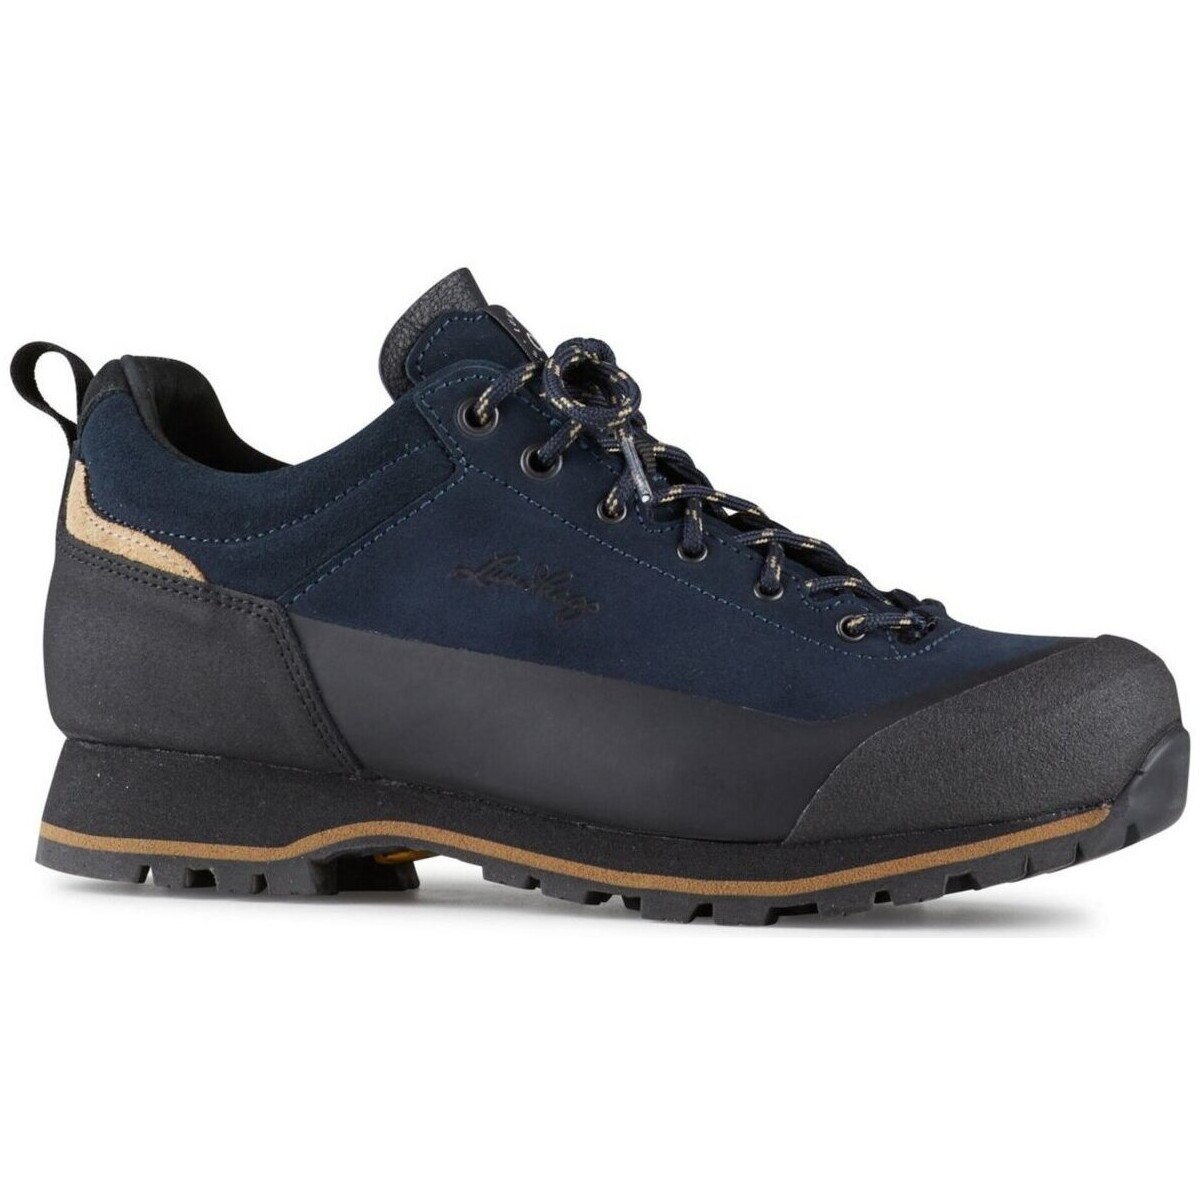 Chaussures Homme Fitness / Training Lundhags  Bleu